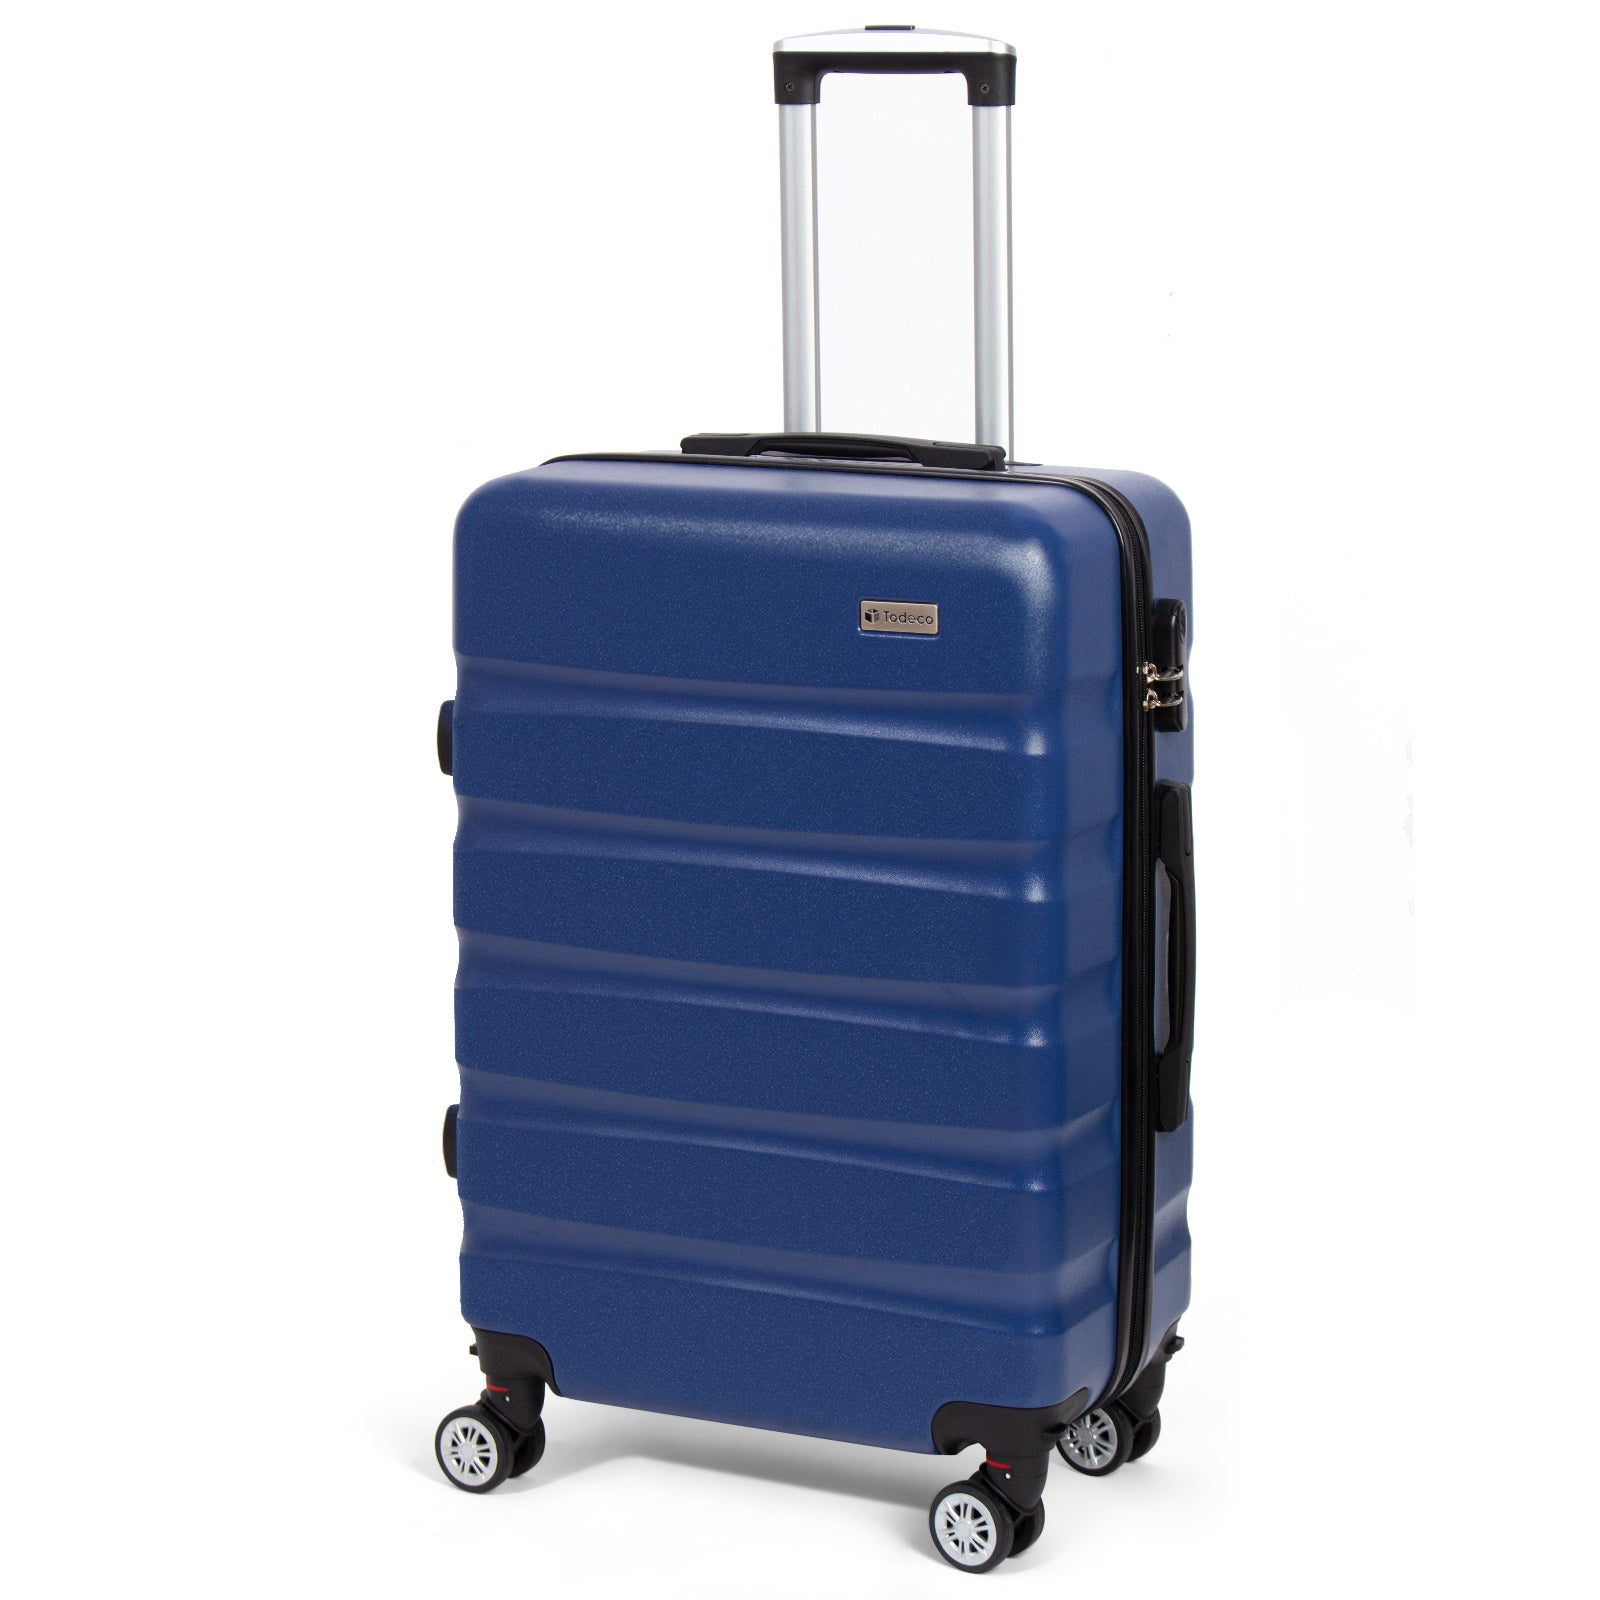 Todeco-Medium-Suitcase-67cm-Rigid-and-Lightweight-ABS-PC-Lightweight-Carry-on-Suitcase-with-Hard-Shell-Travel-Suitcase-with-4-Double-Wheels-67-44-25cm-Dark-Blue